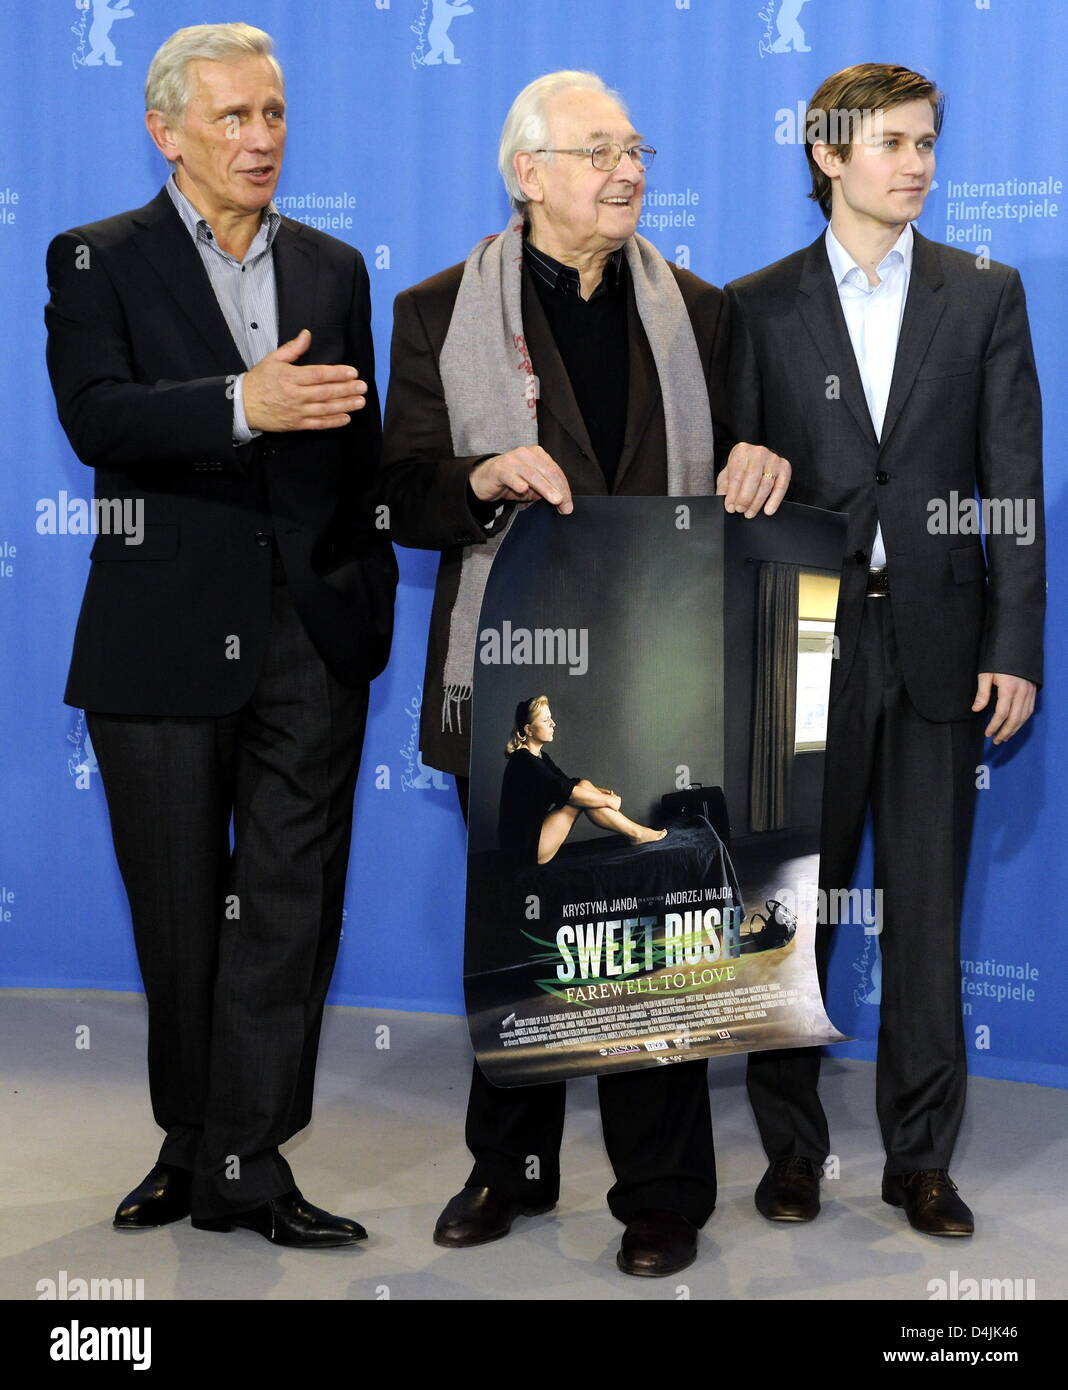 Polish actors Pawel Szajda (R) and Jan Englert (L) pose with Polish director Andrzej Wadja during the photo call on the film ?Sweet Rush? at the 59th Berlin International Film Festival in Berlin, Germany, 13 February 2009. The film runs in Competition, a total of 18 films compete for the Silver and Golden Bears of the 59th Berlinale. Photo: Tim Brakemeier Stock Photo